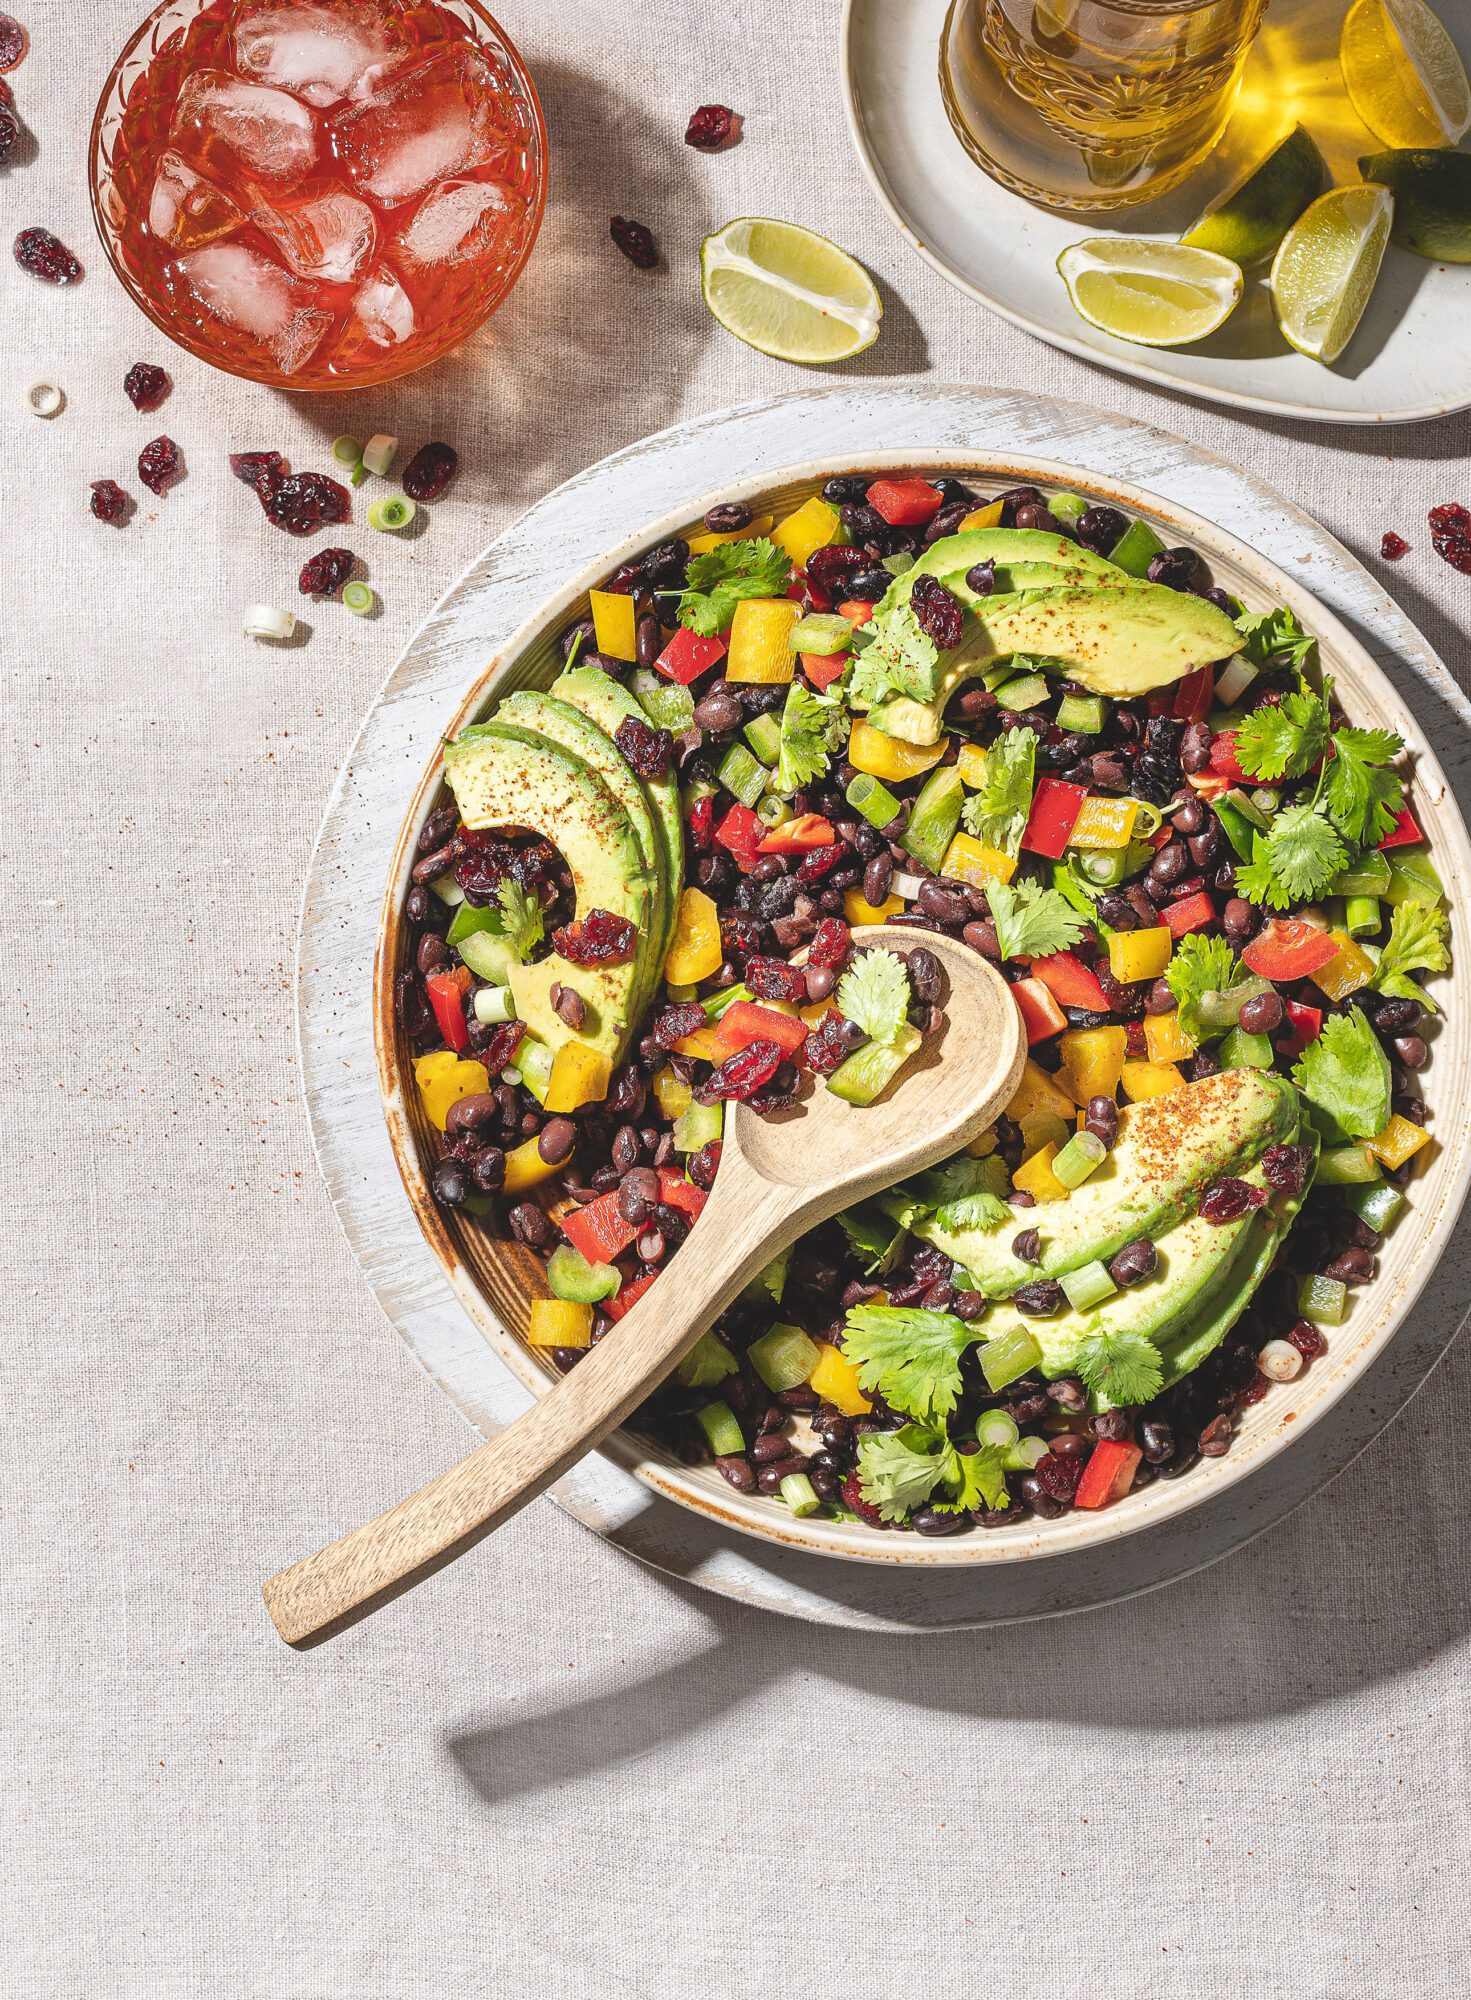 Crunch and colour: This vegan rainbow salad ticks all the boxes